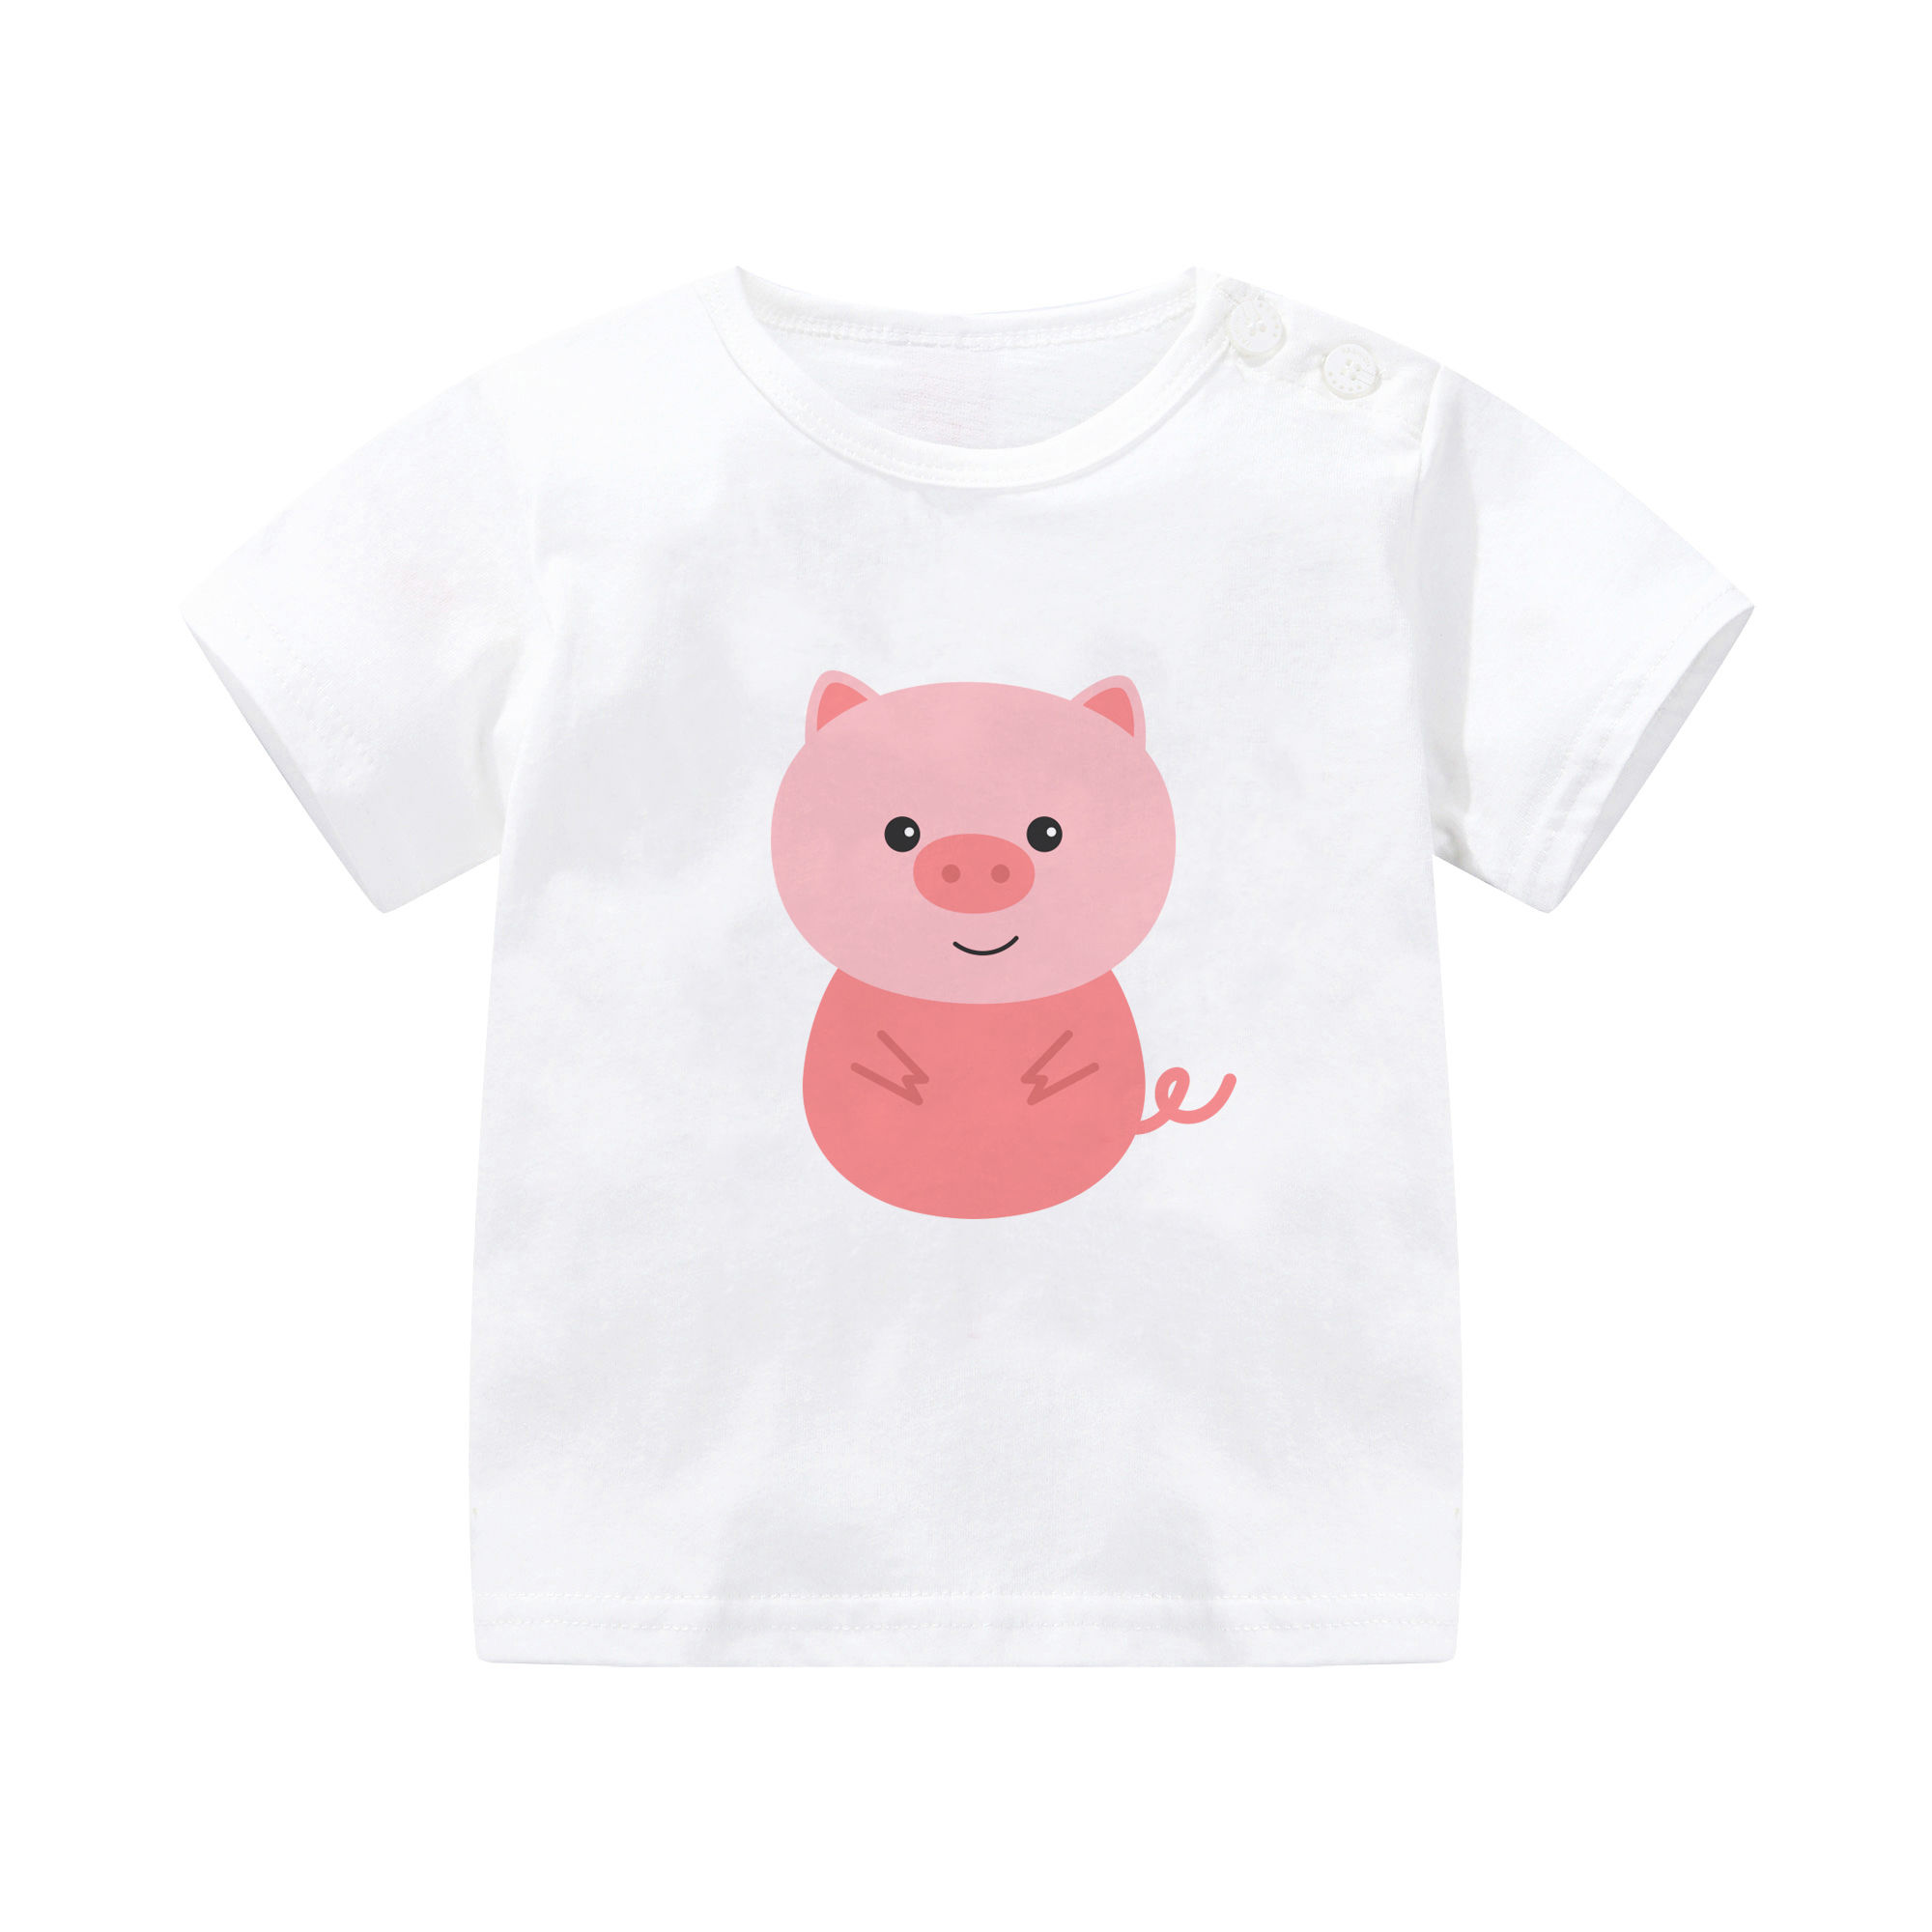 100% cotton tee for girls | white tee for kids | white tee with cute piggy print